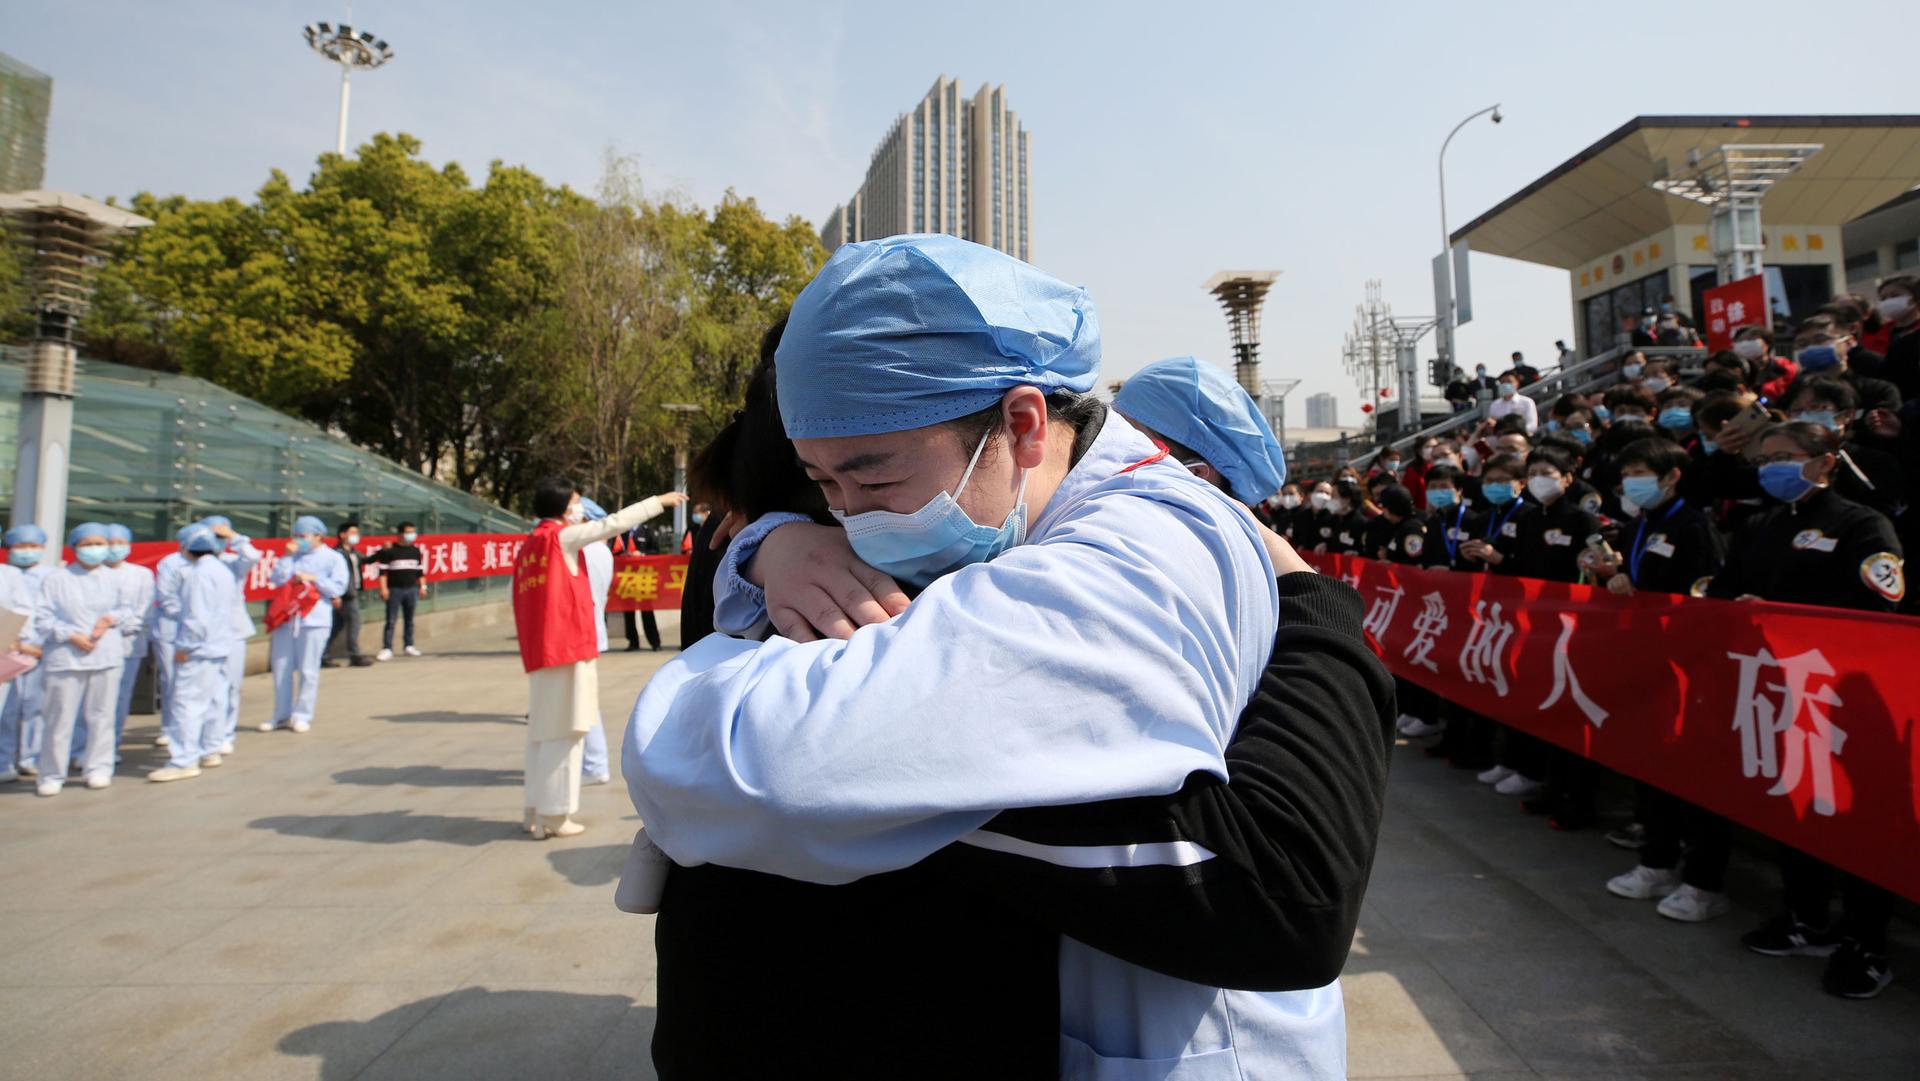 A man wearing a face mask and protective clothing is shown hugging another person in the street.